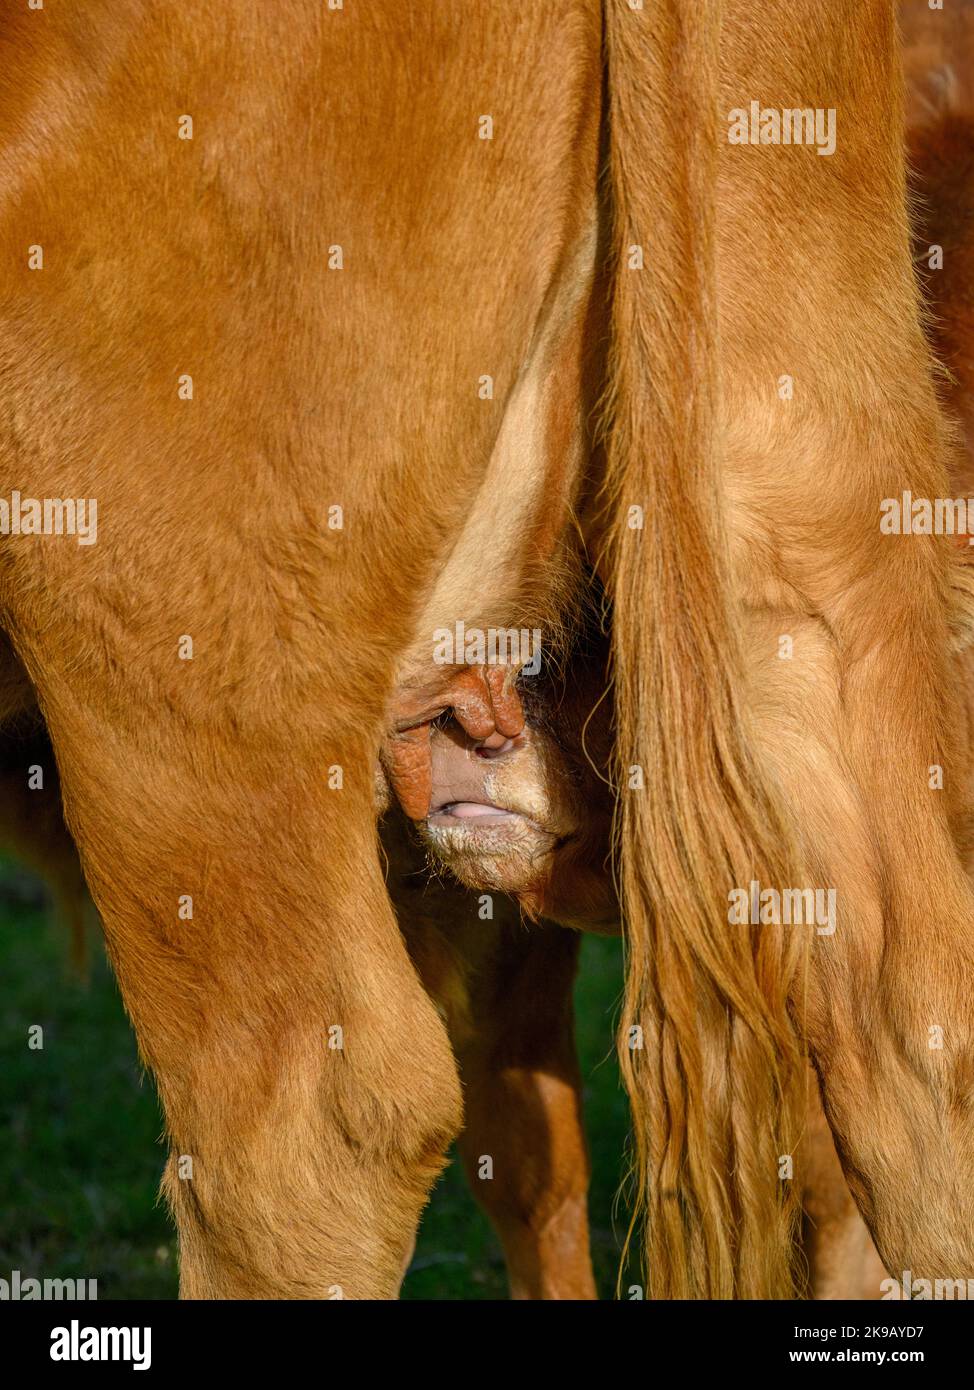 Sunlit brown cow & small newborn calf standing in farm field (hungry thirsty youngster, mother's milk, udder teats close-up) - Yorkshire, England, UK. Stock Photo